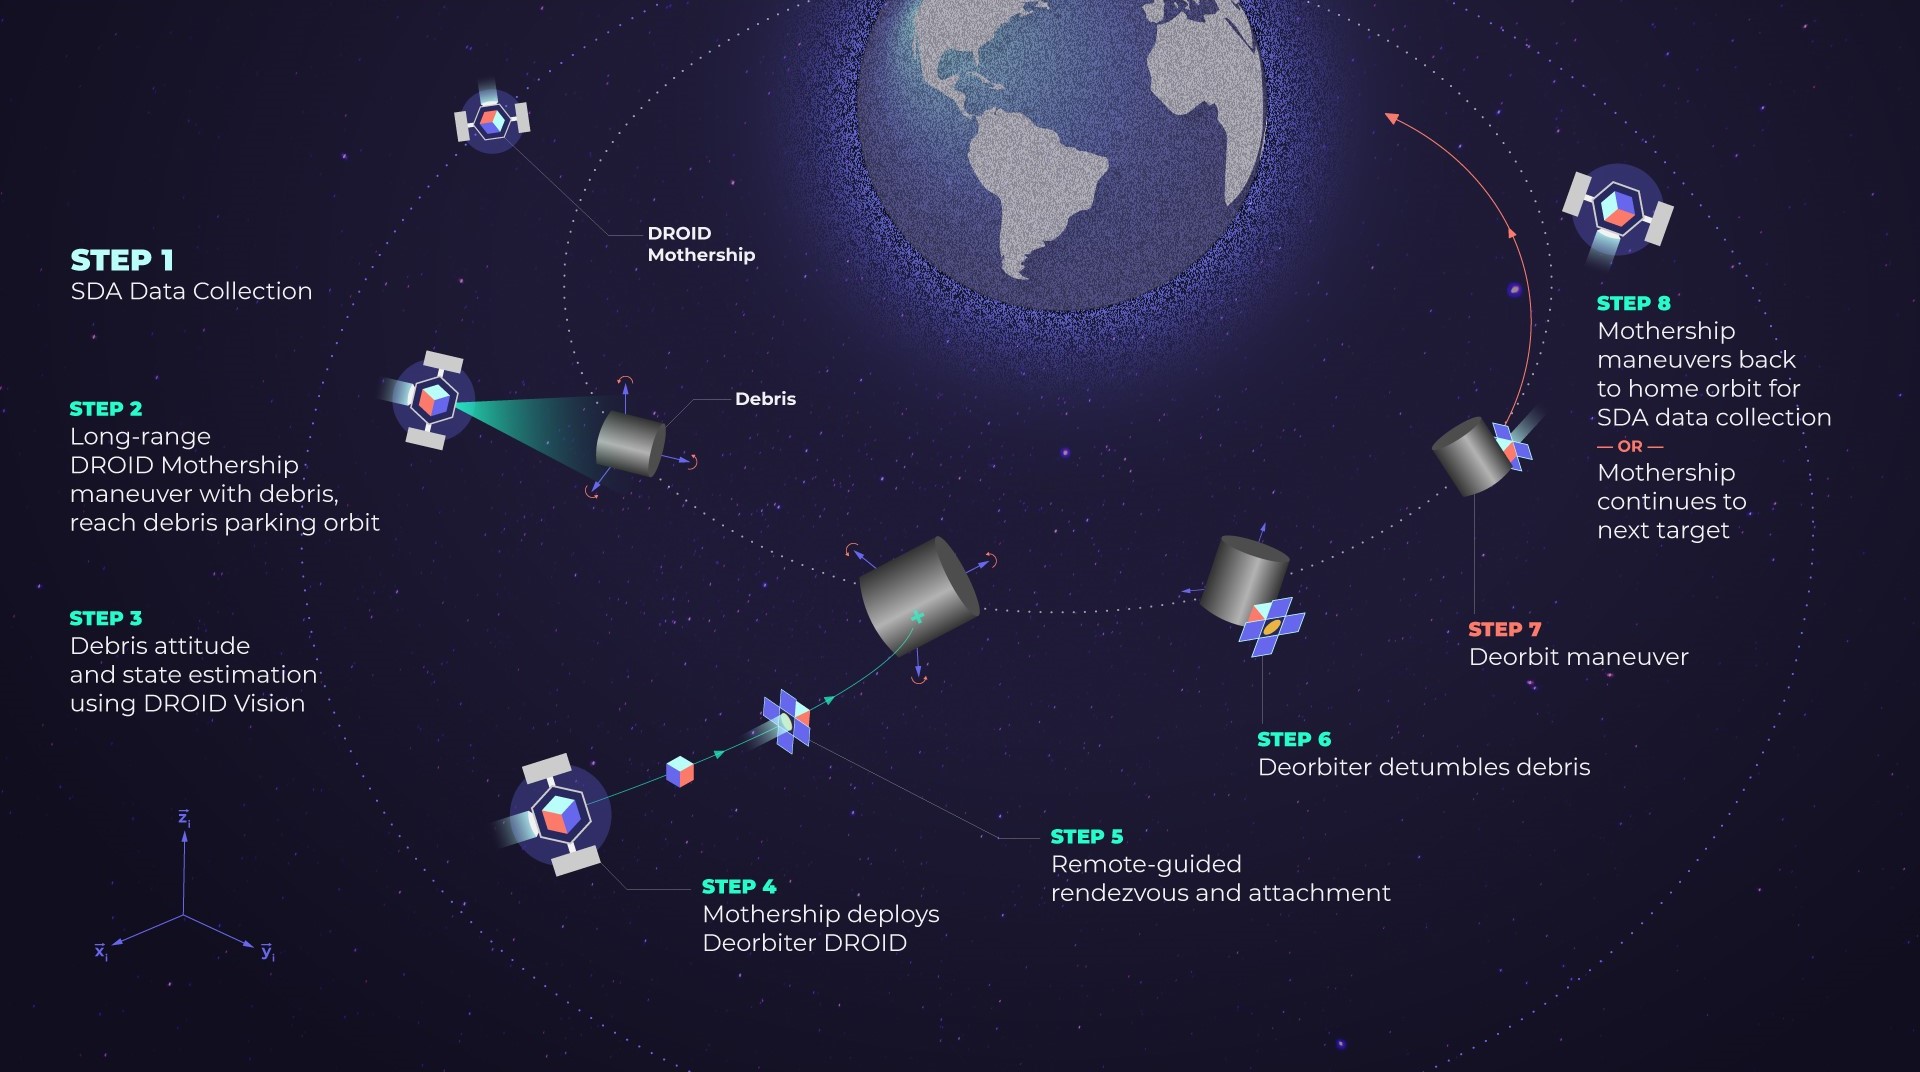 Turion awarded Space Force contract for pioneering debris-capture technology